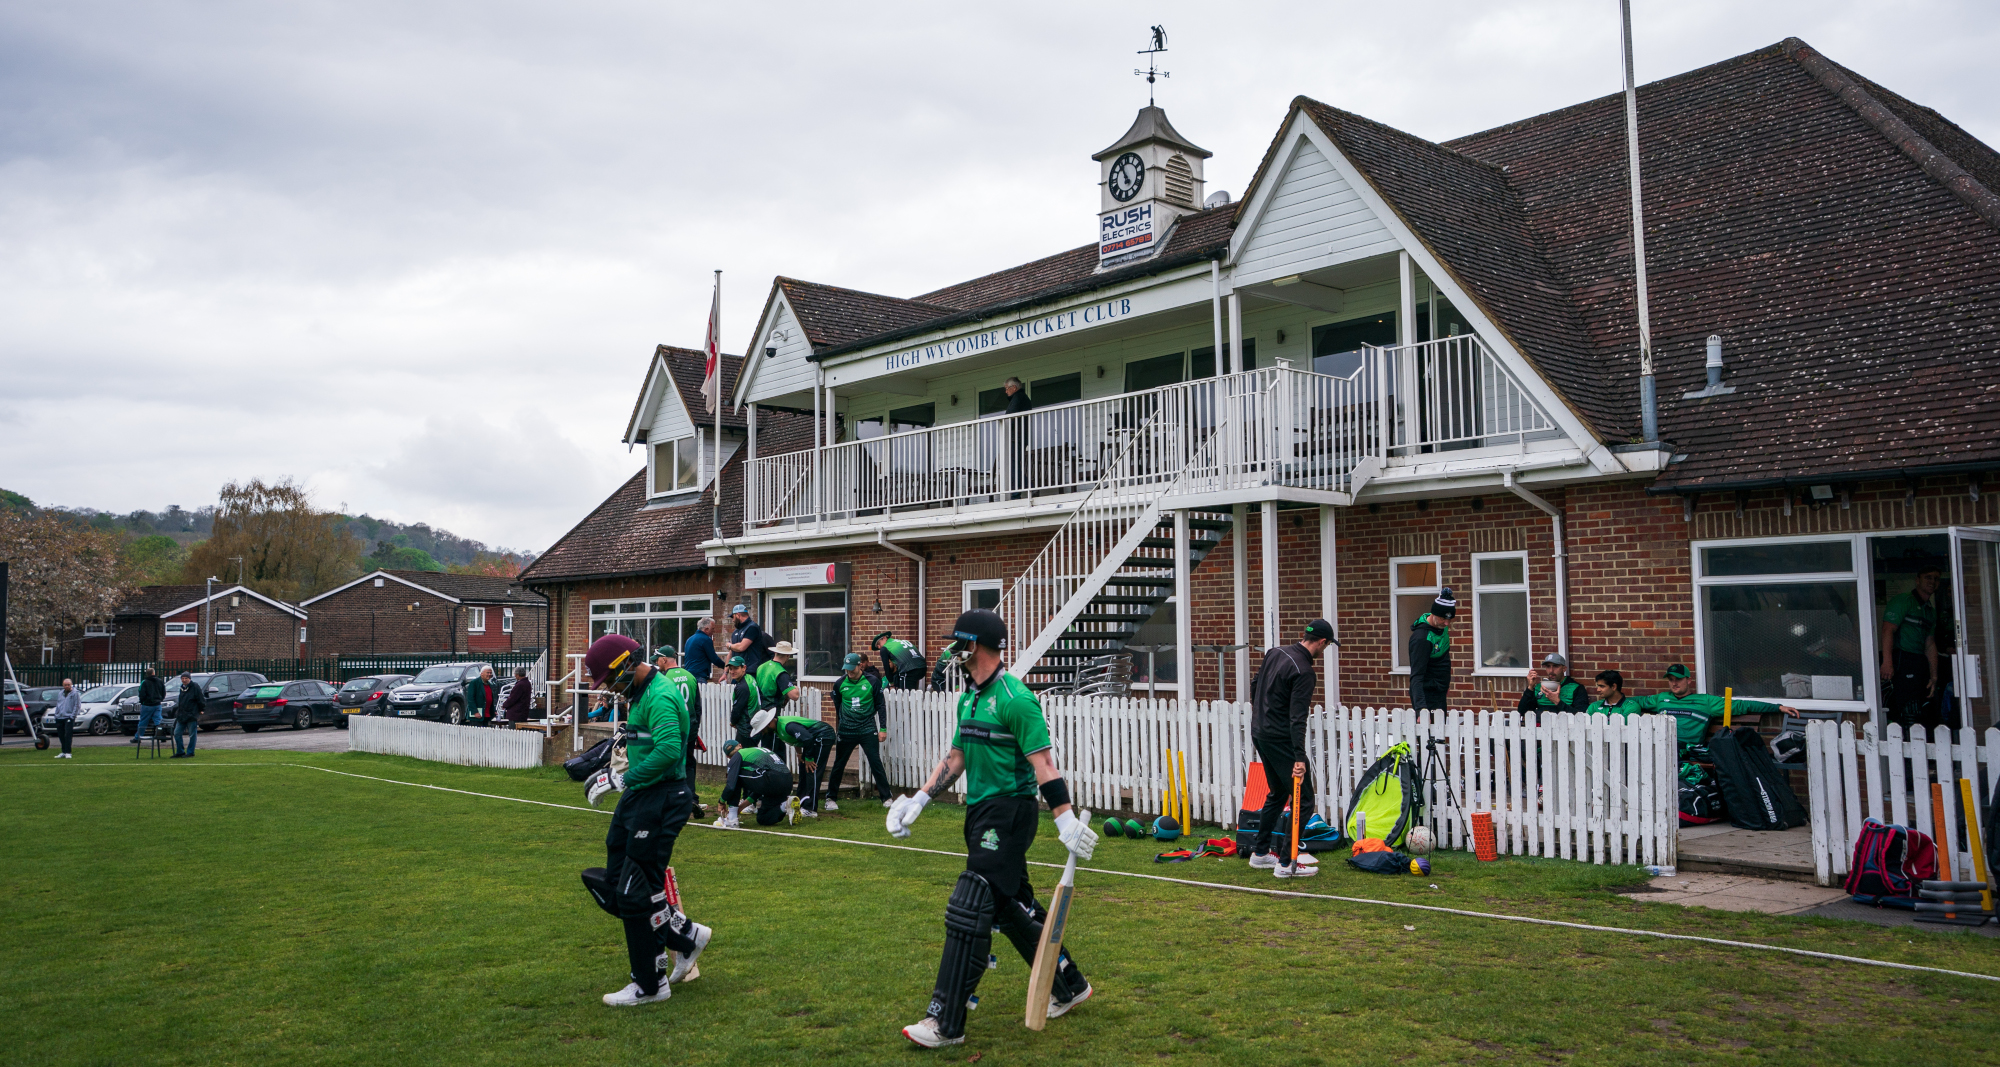 Bucks v Beds T20 at High Wycombe can be viewed by following the link below